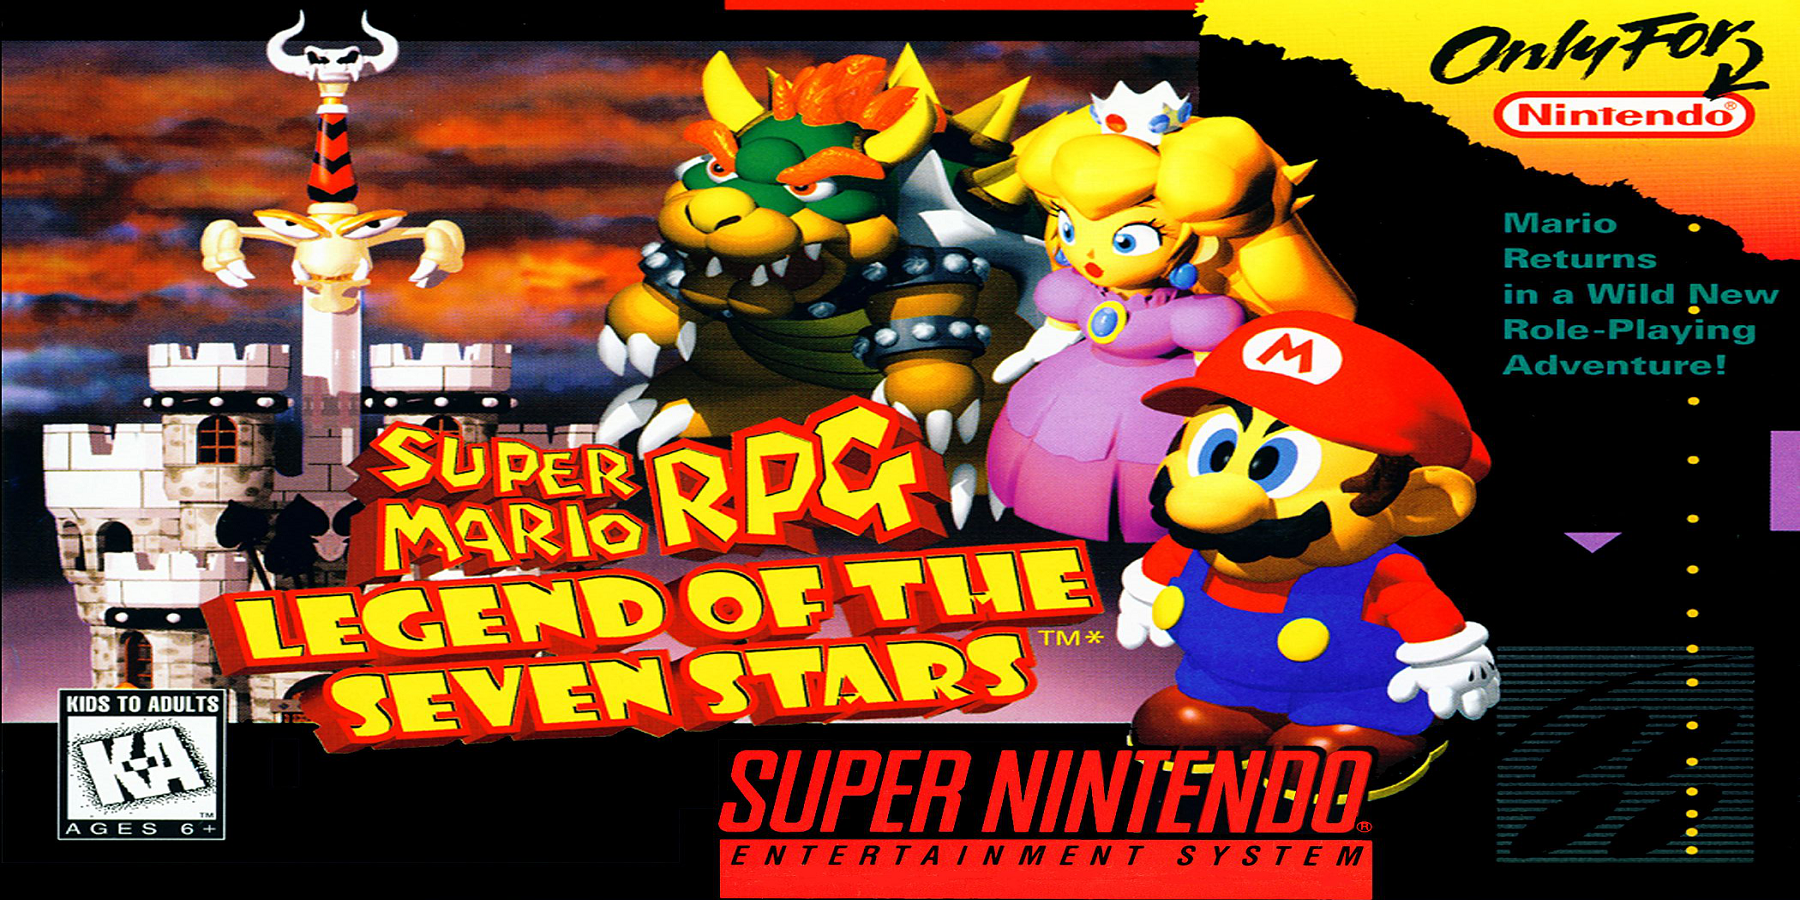 Super Mario RPG is back after 27 years on Nintendo Switch! - Saiga NAK